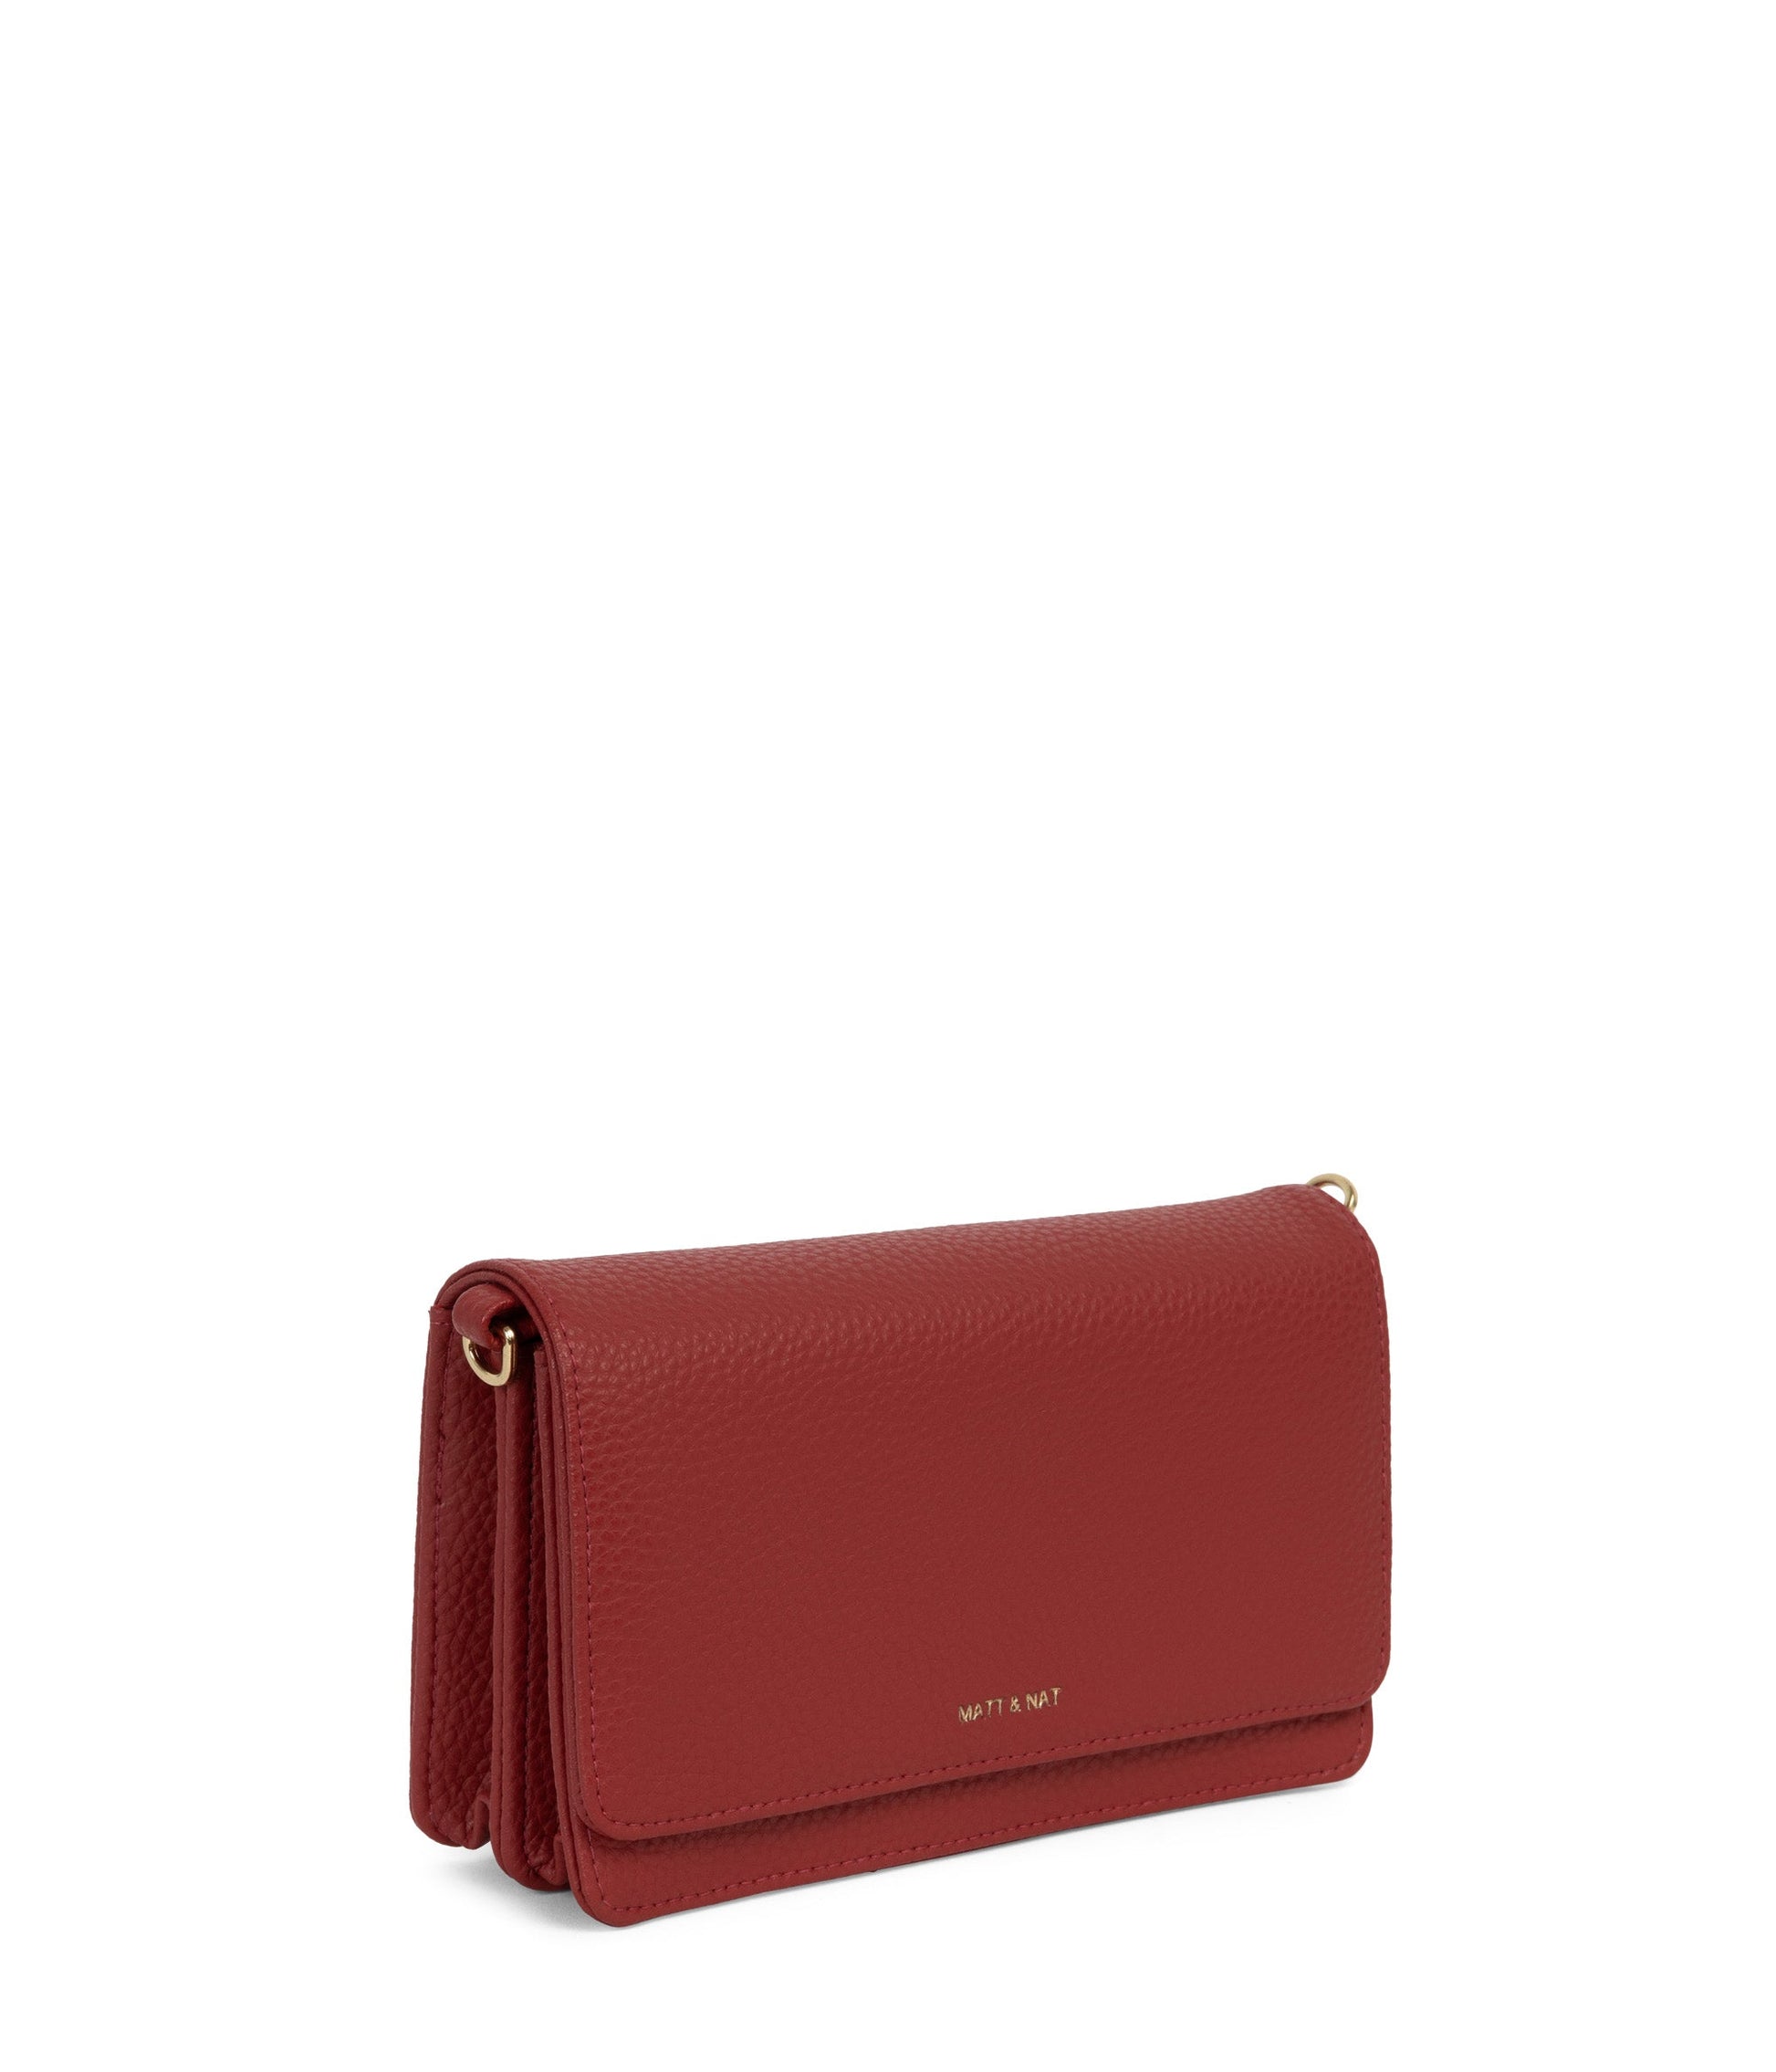 BEE Vegan Crossbody Bag - Purity | Color: Red - variant::passion